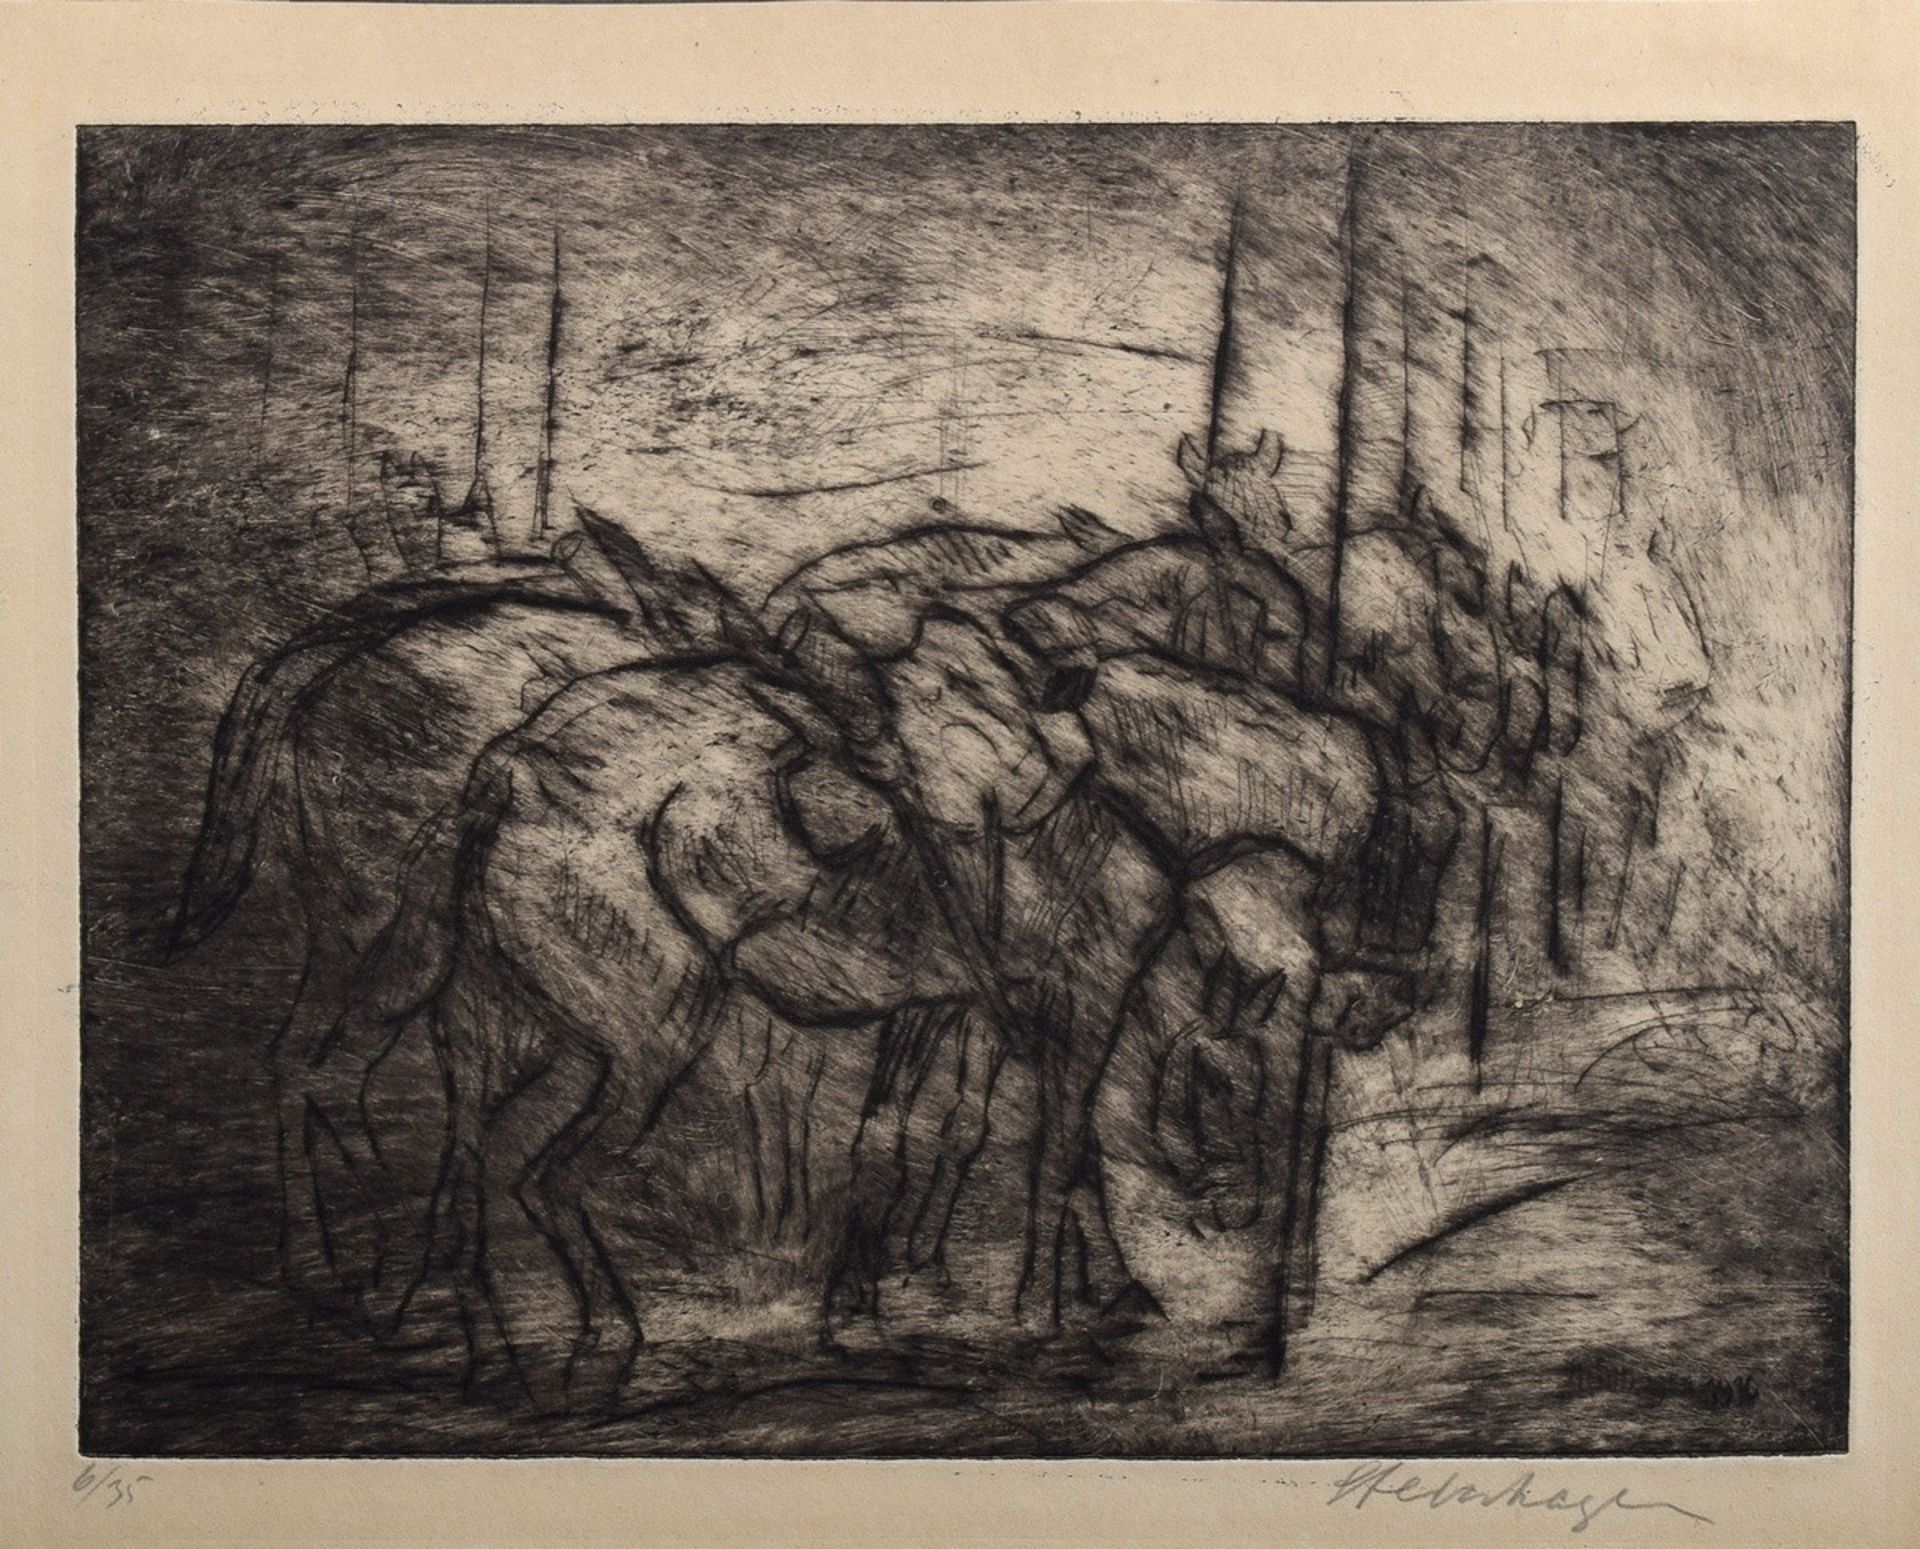 5 Steinhagen, Heinrich (1880-1948) "Scenes from World War I" 1915/16, etchings, some signed and dat - Image 10 of 11